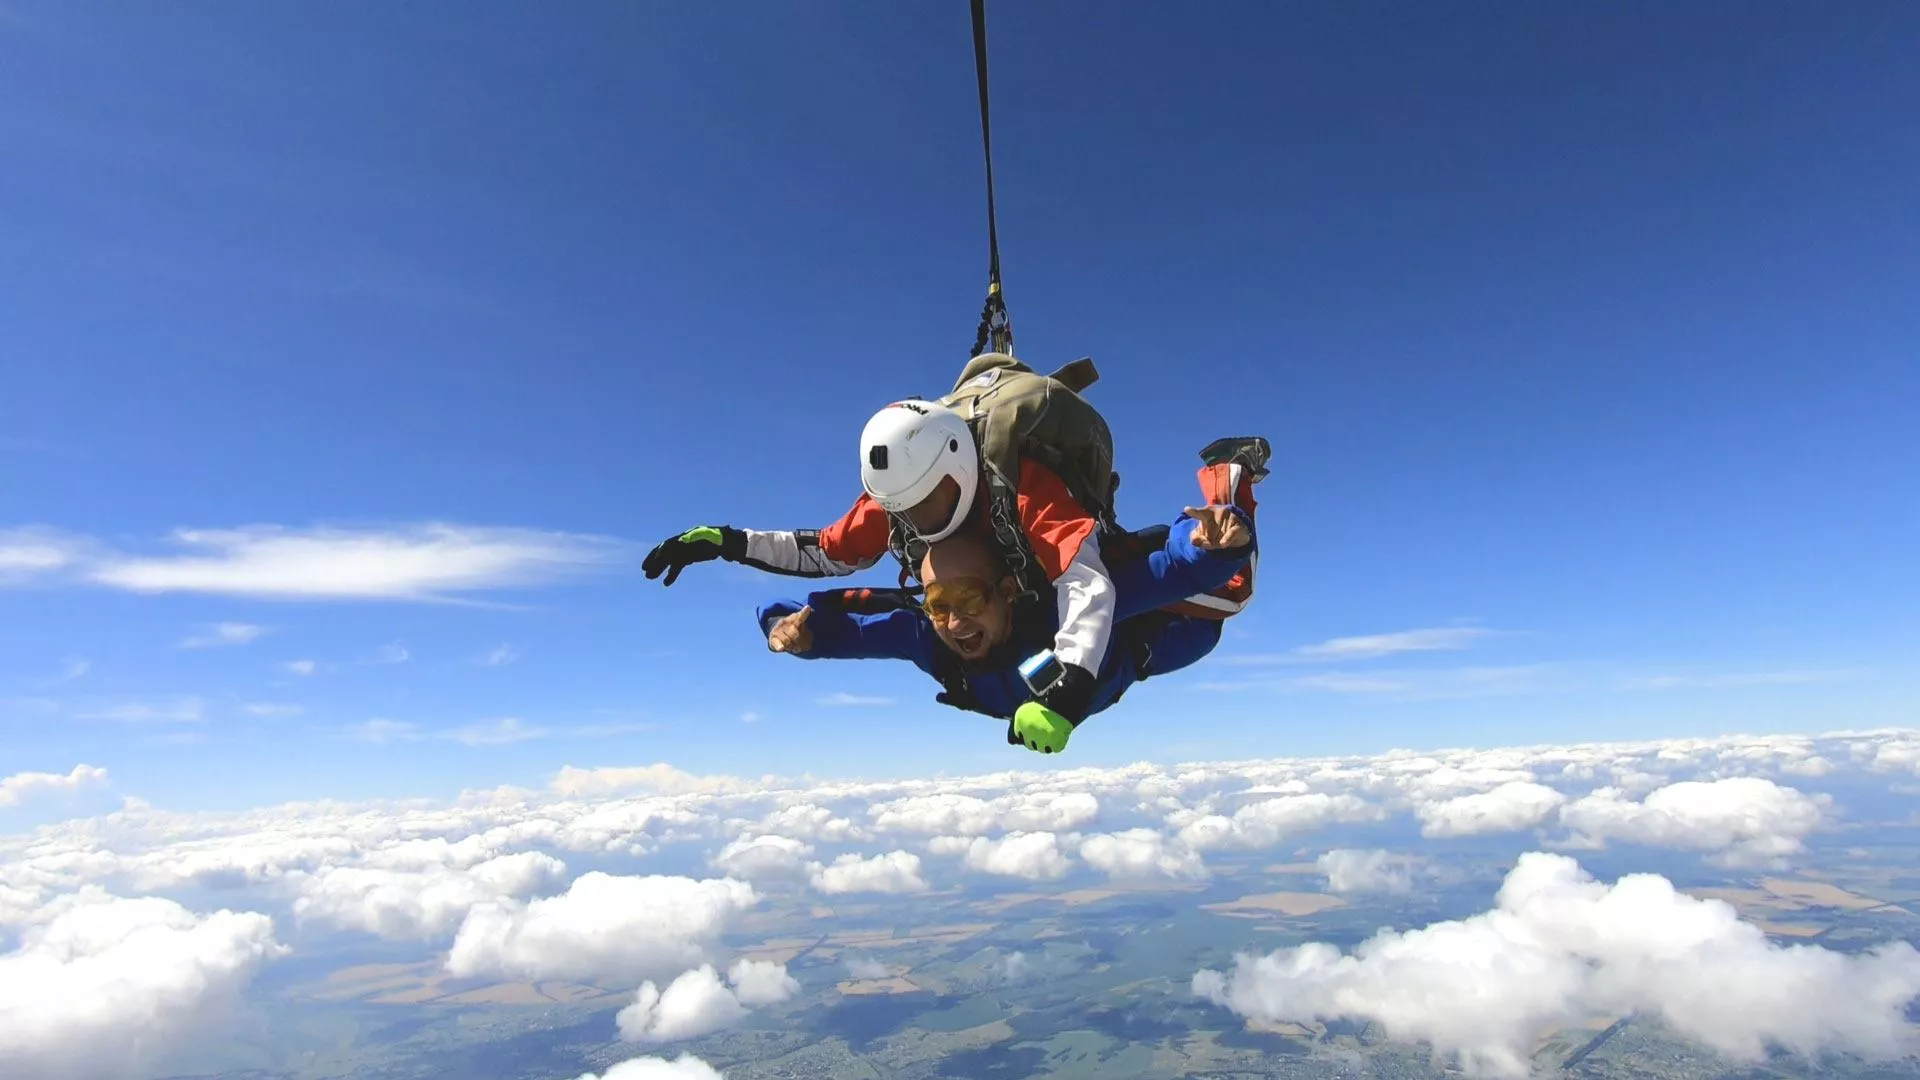 Skydive Subotica in Serbia, Europe | Skydiving - Rated 1